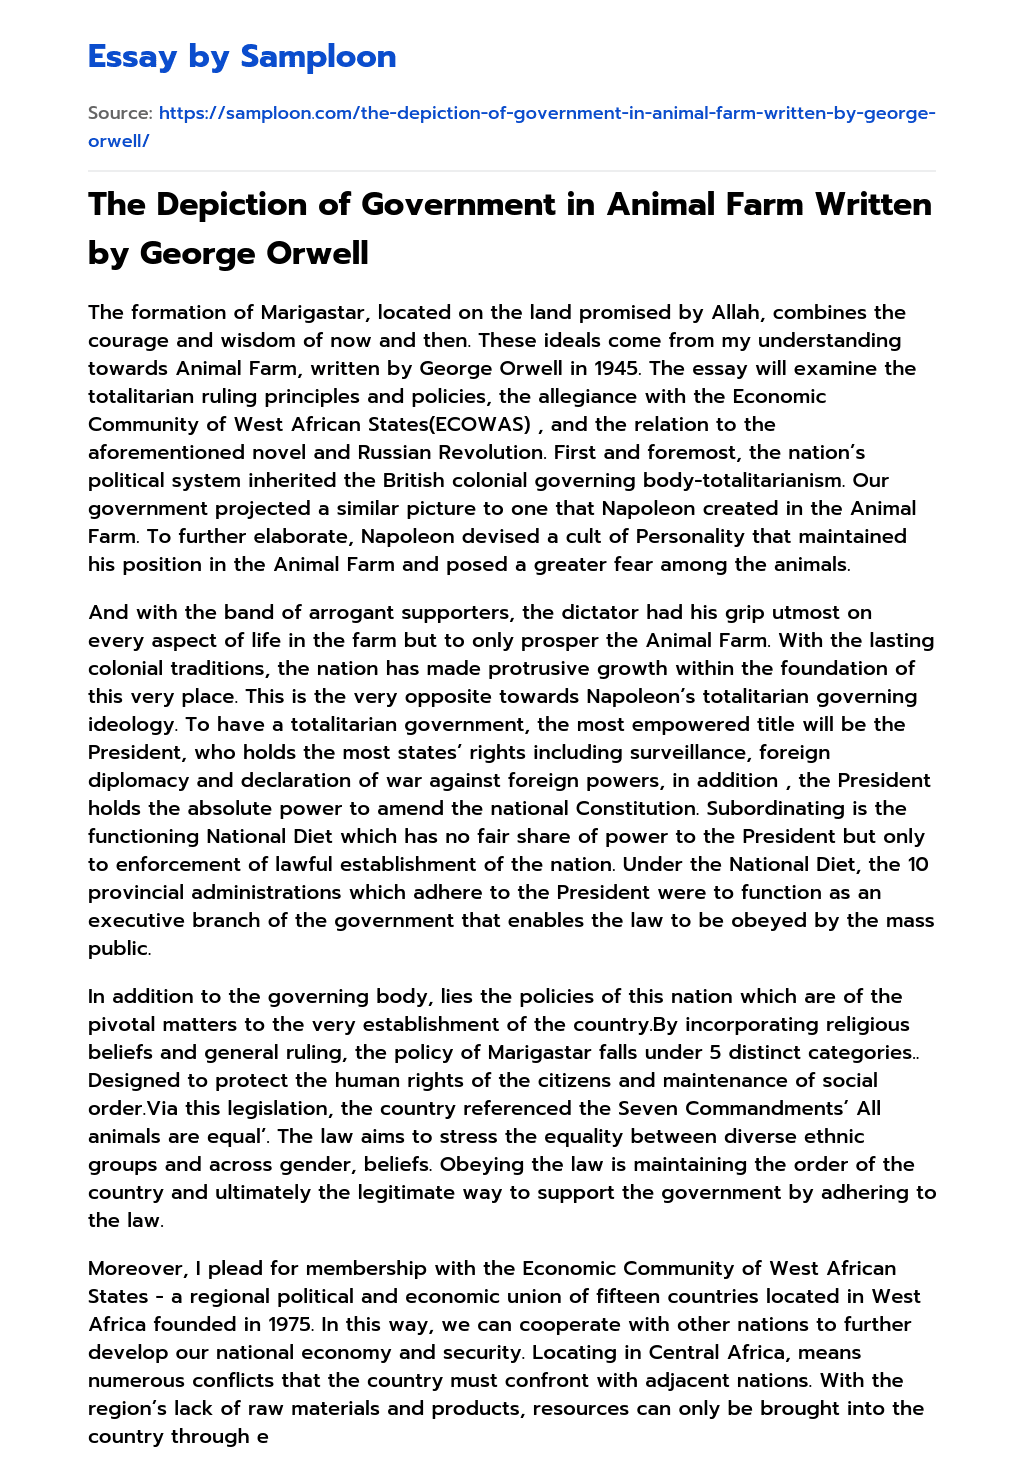 The Depiction of Government in Animal Farm Written by George Orwell essay